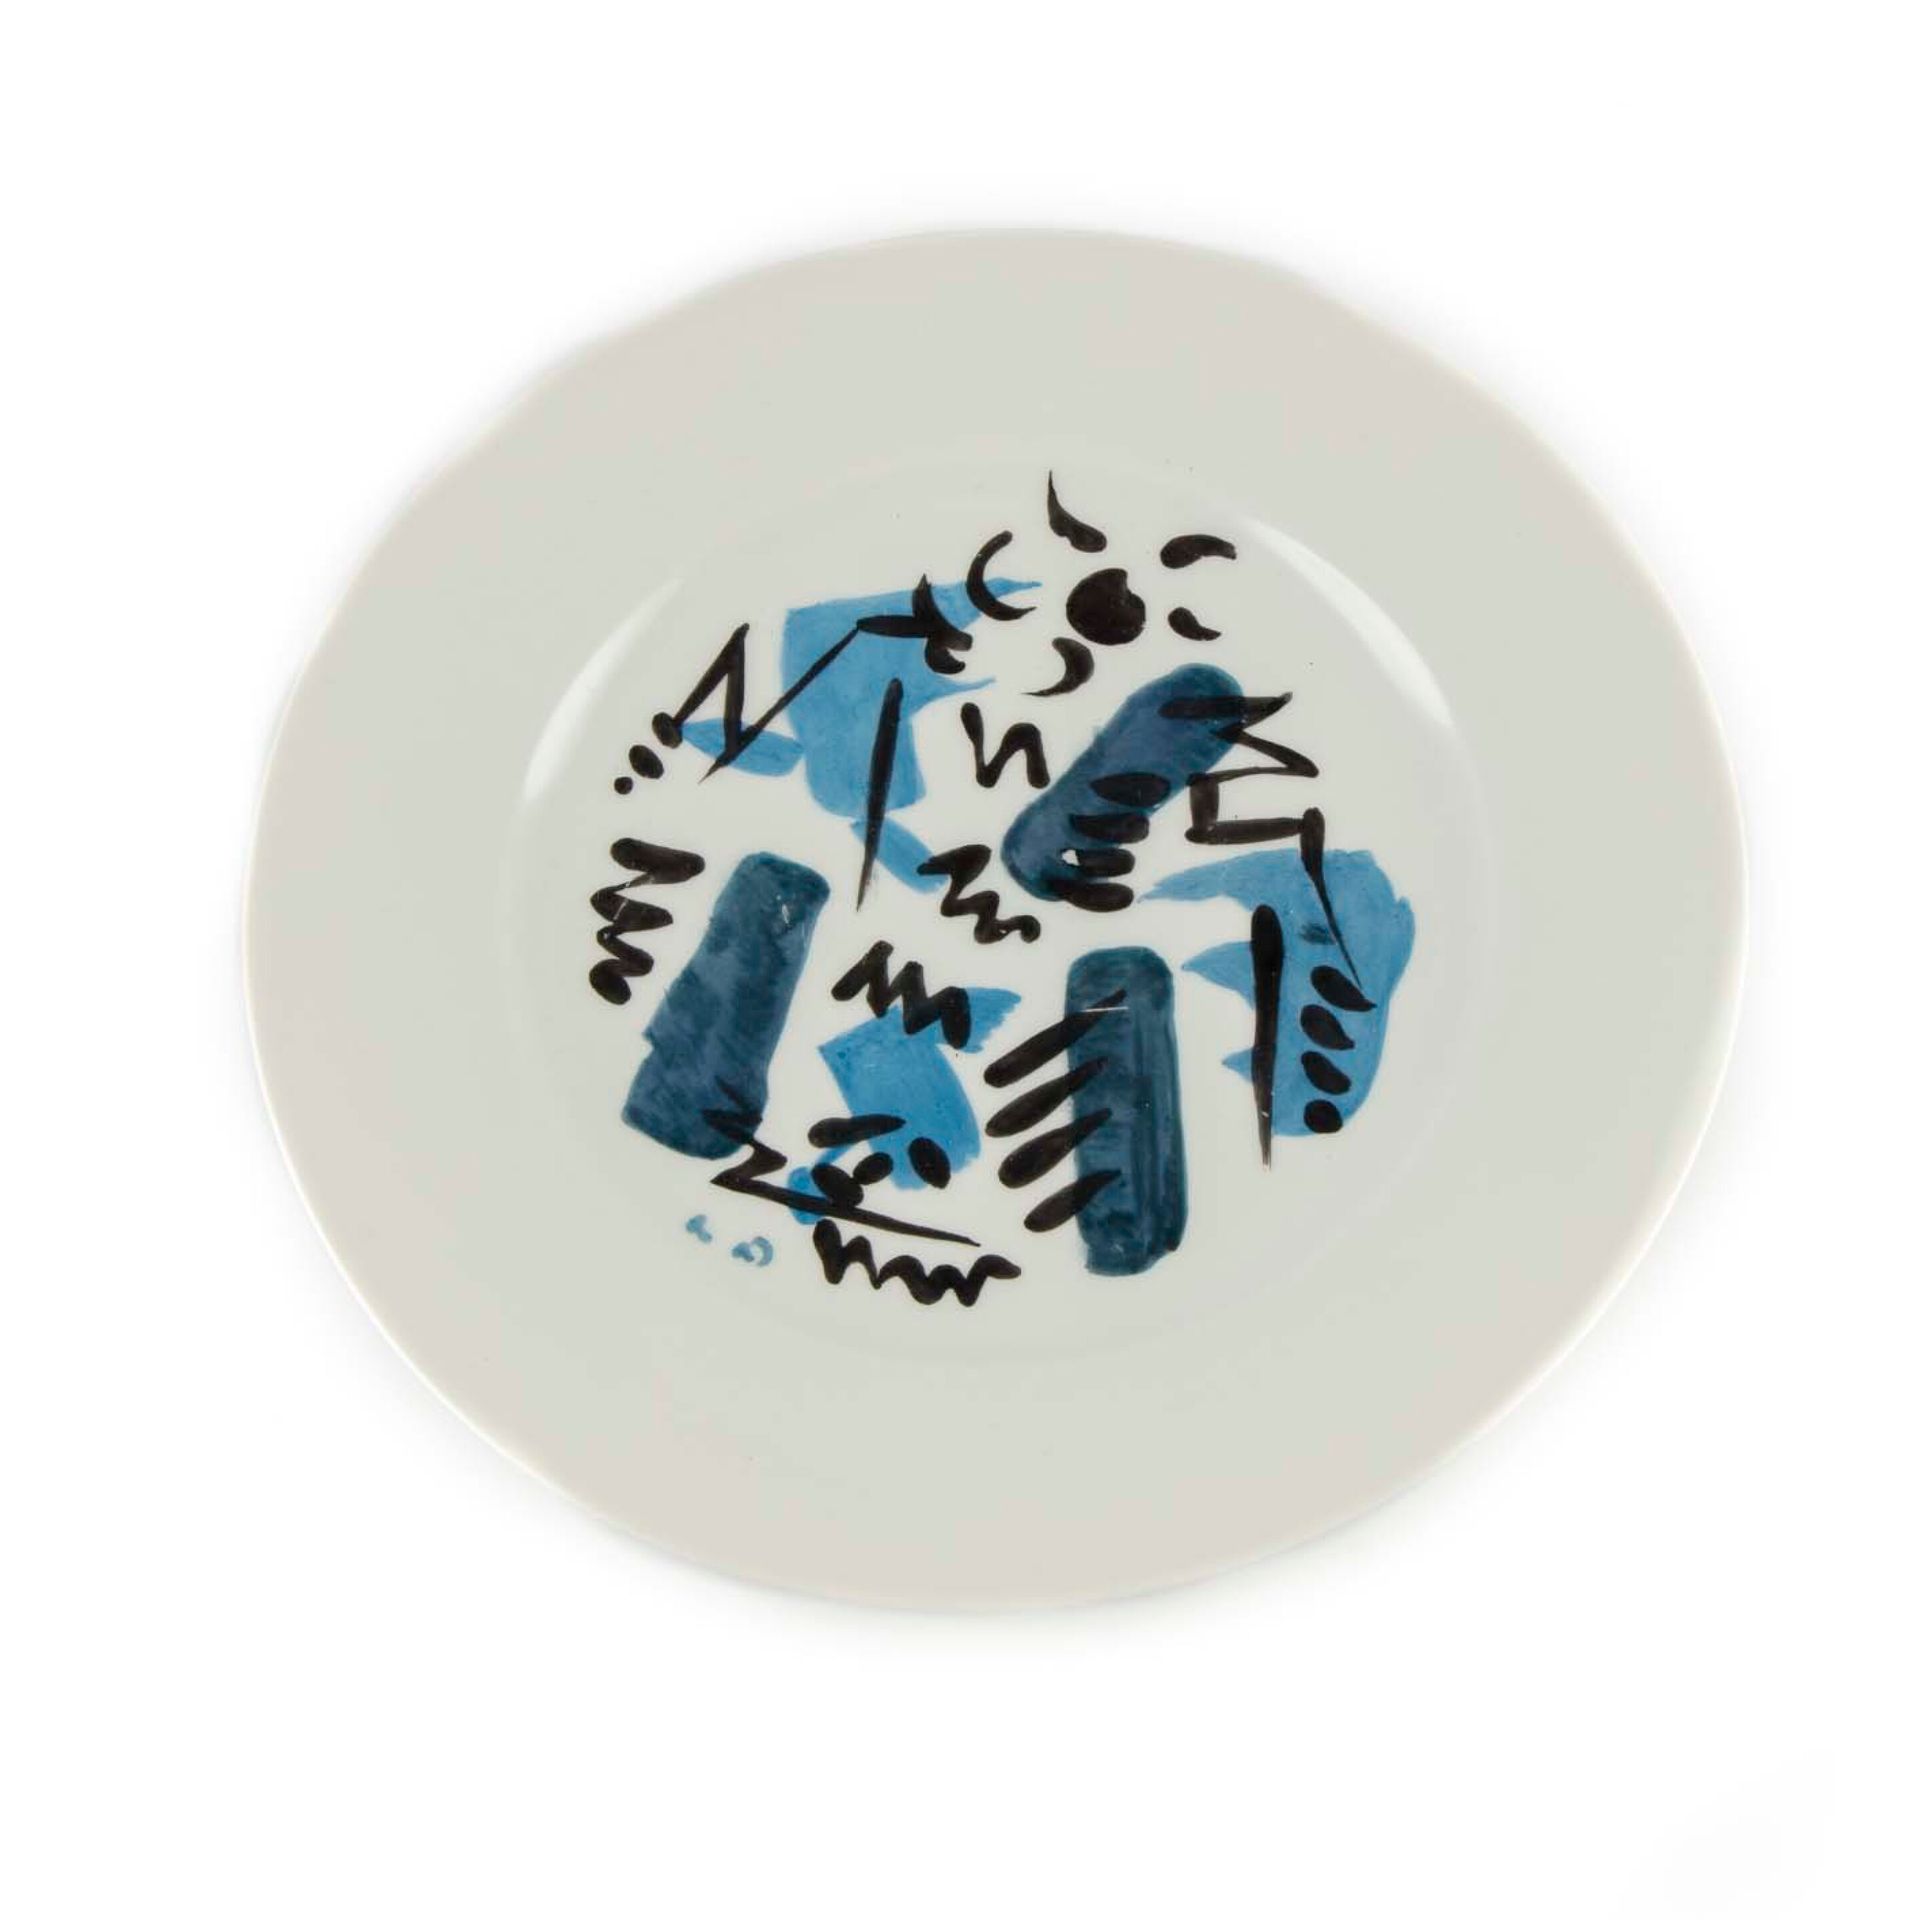 Null André MASSON (1896-1987)

Plate with enamelled decoration

Signed on the ba&hellip;